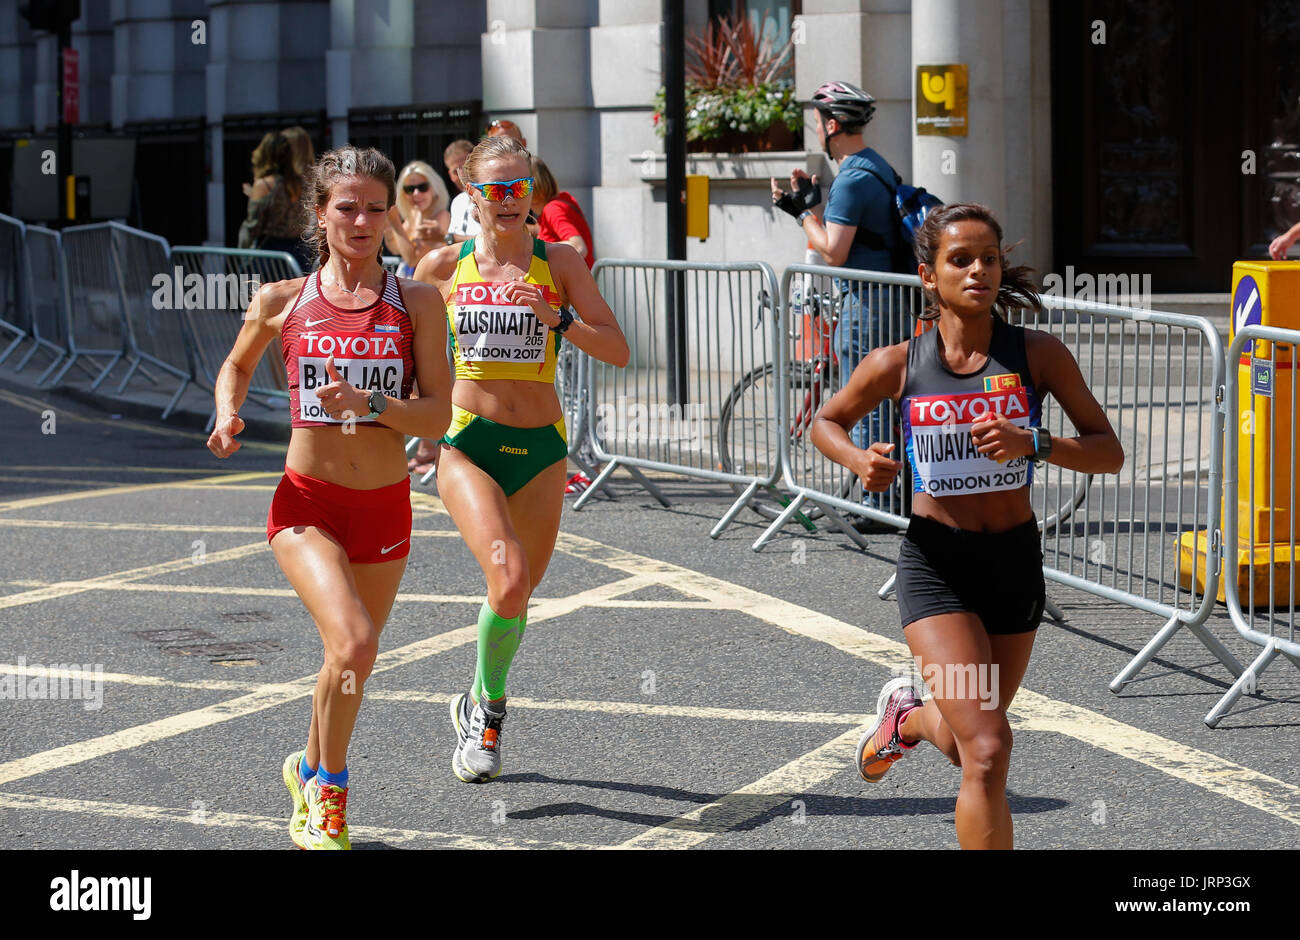 August 6th 2017 World Athletics Championship in London. IAAF women marathon  06/08/2017 started at 2pm local time. UK weather is perfect for a marathon  with sun and few white clouds. Women running